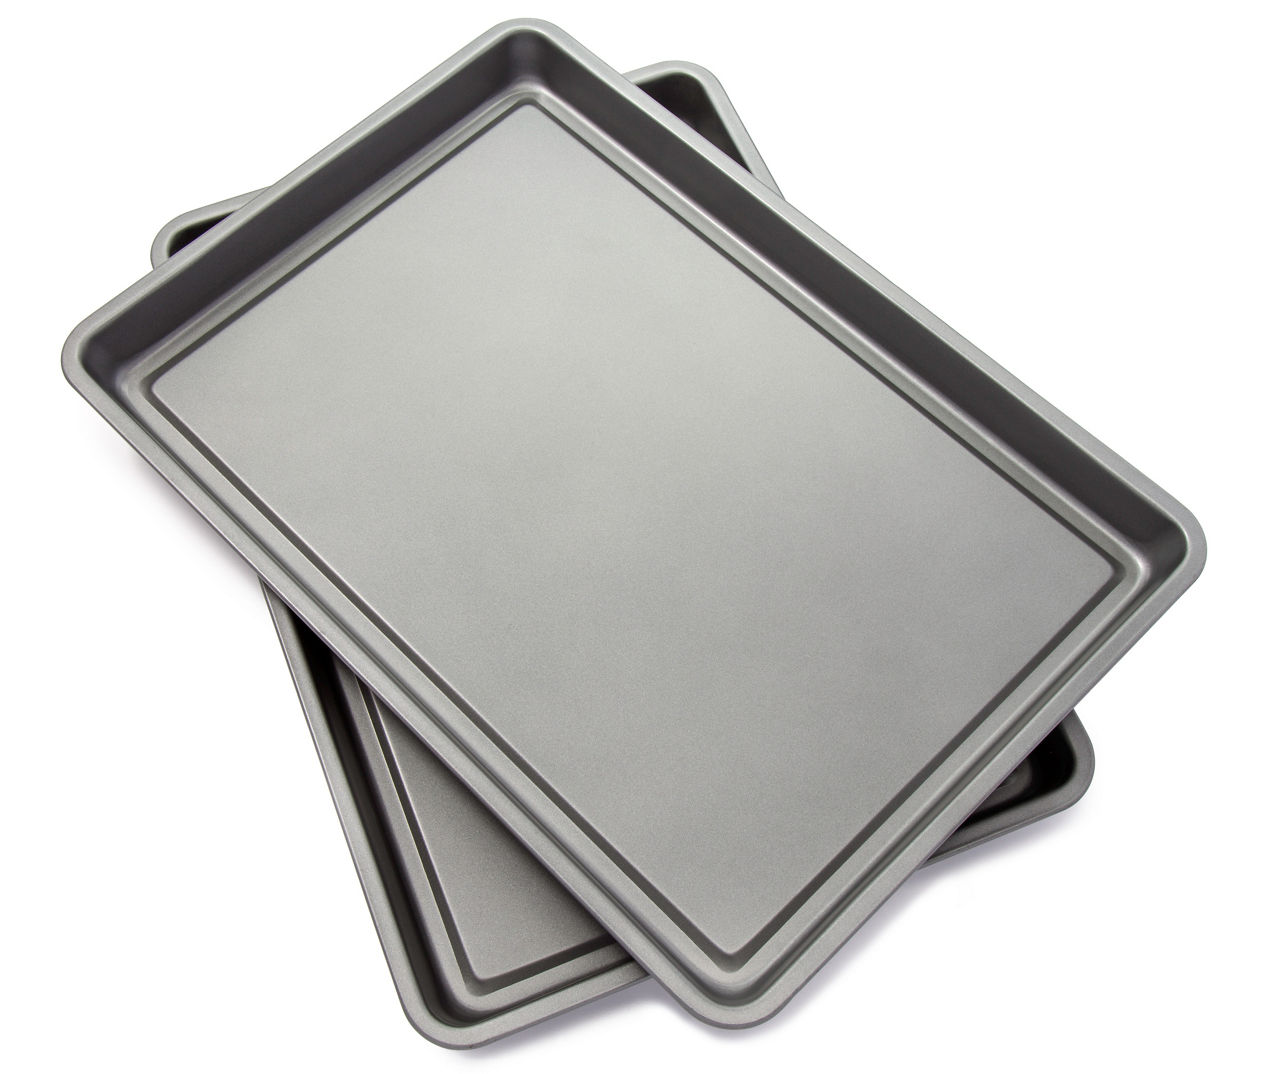  QtthZZr Jelly Roll Pan 14-inch Non-Stick Tray Oven